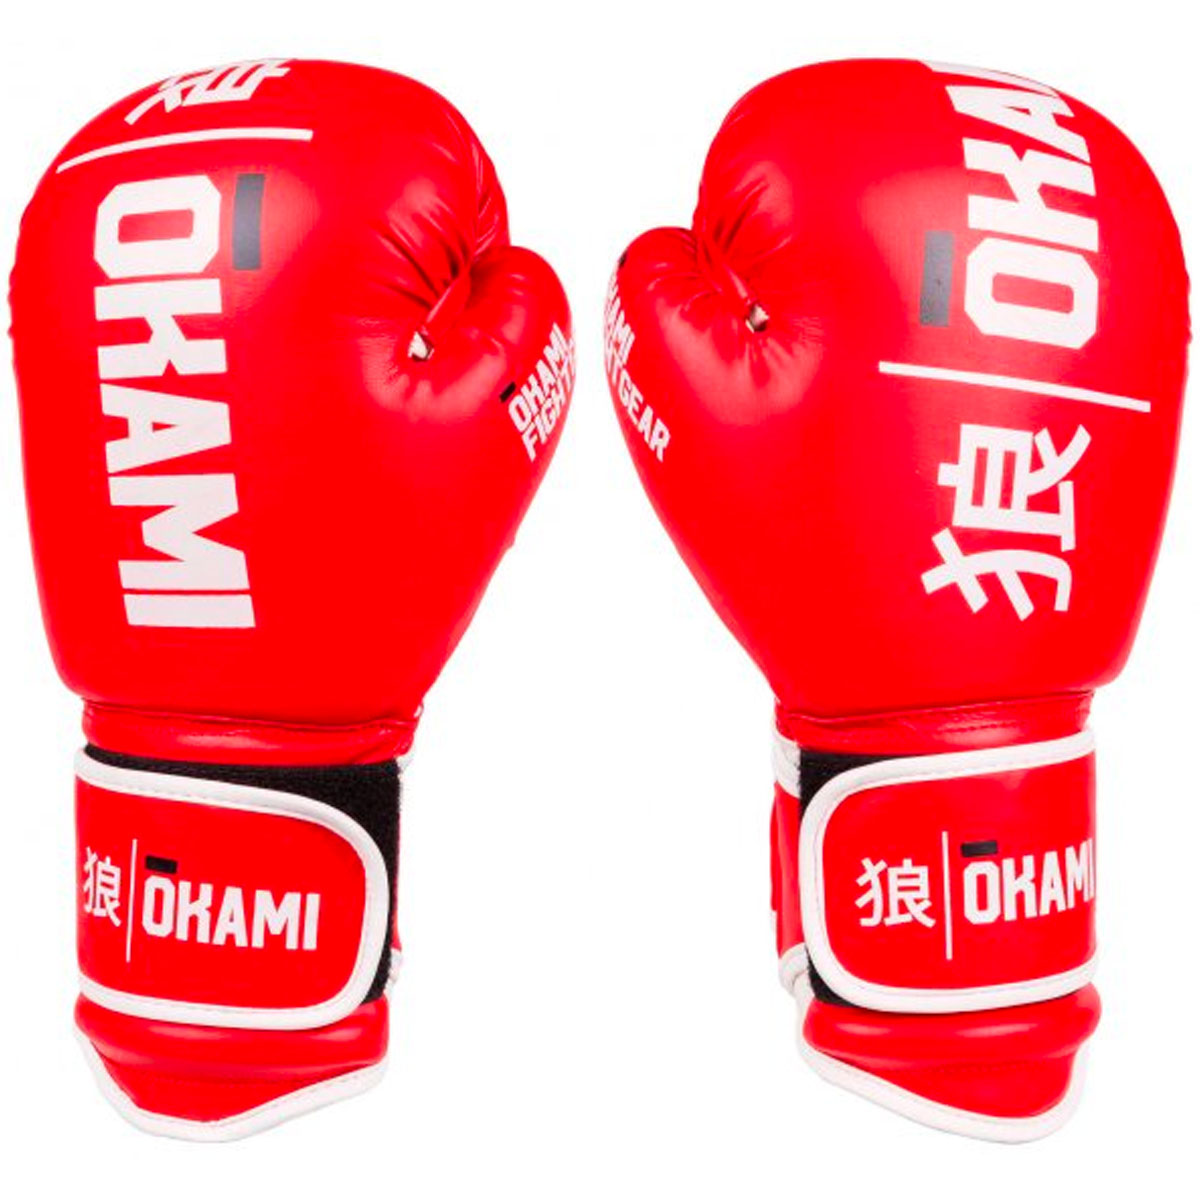 OKAMI Boxing Gloves, Red Rumble